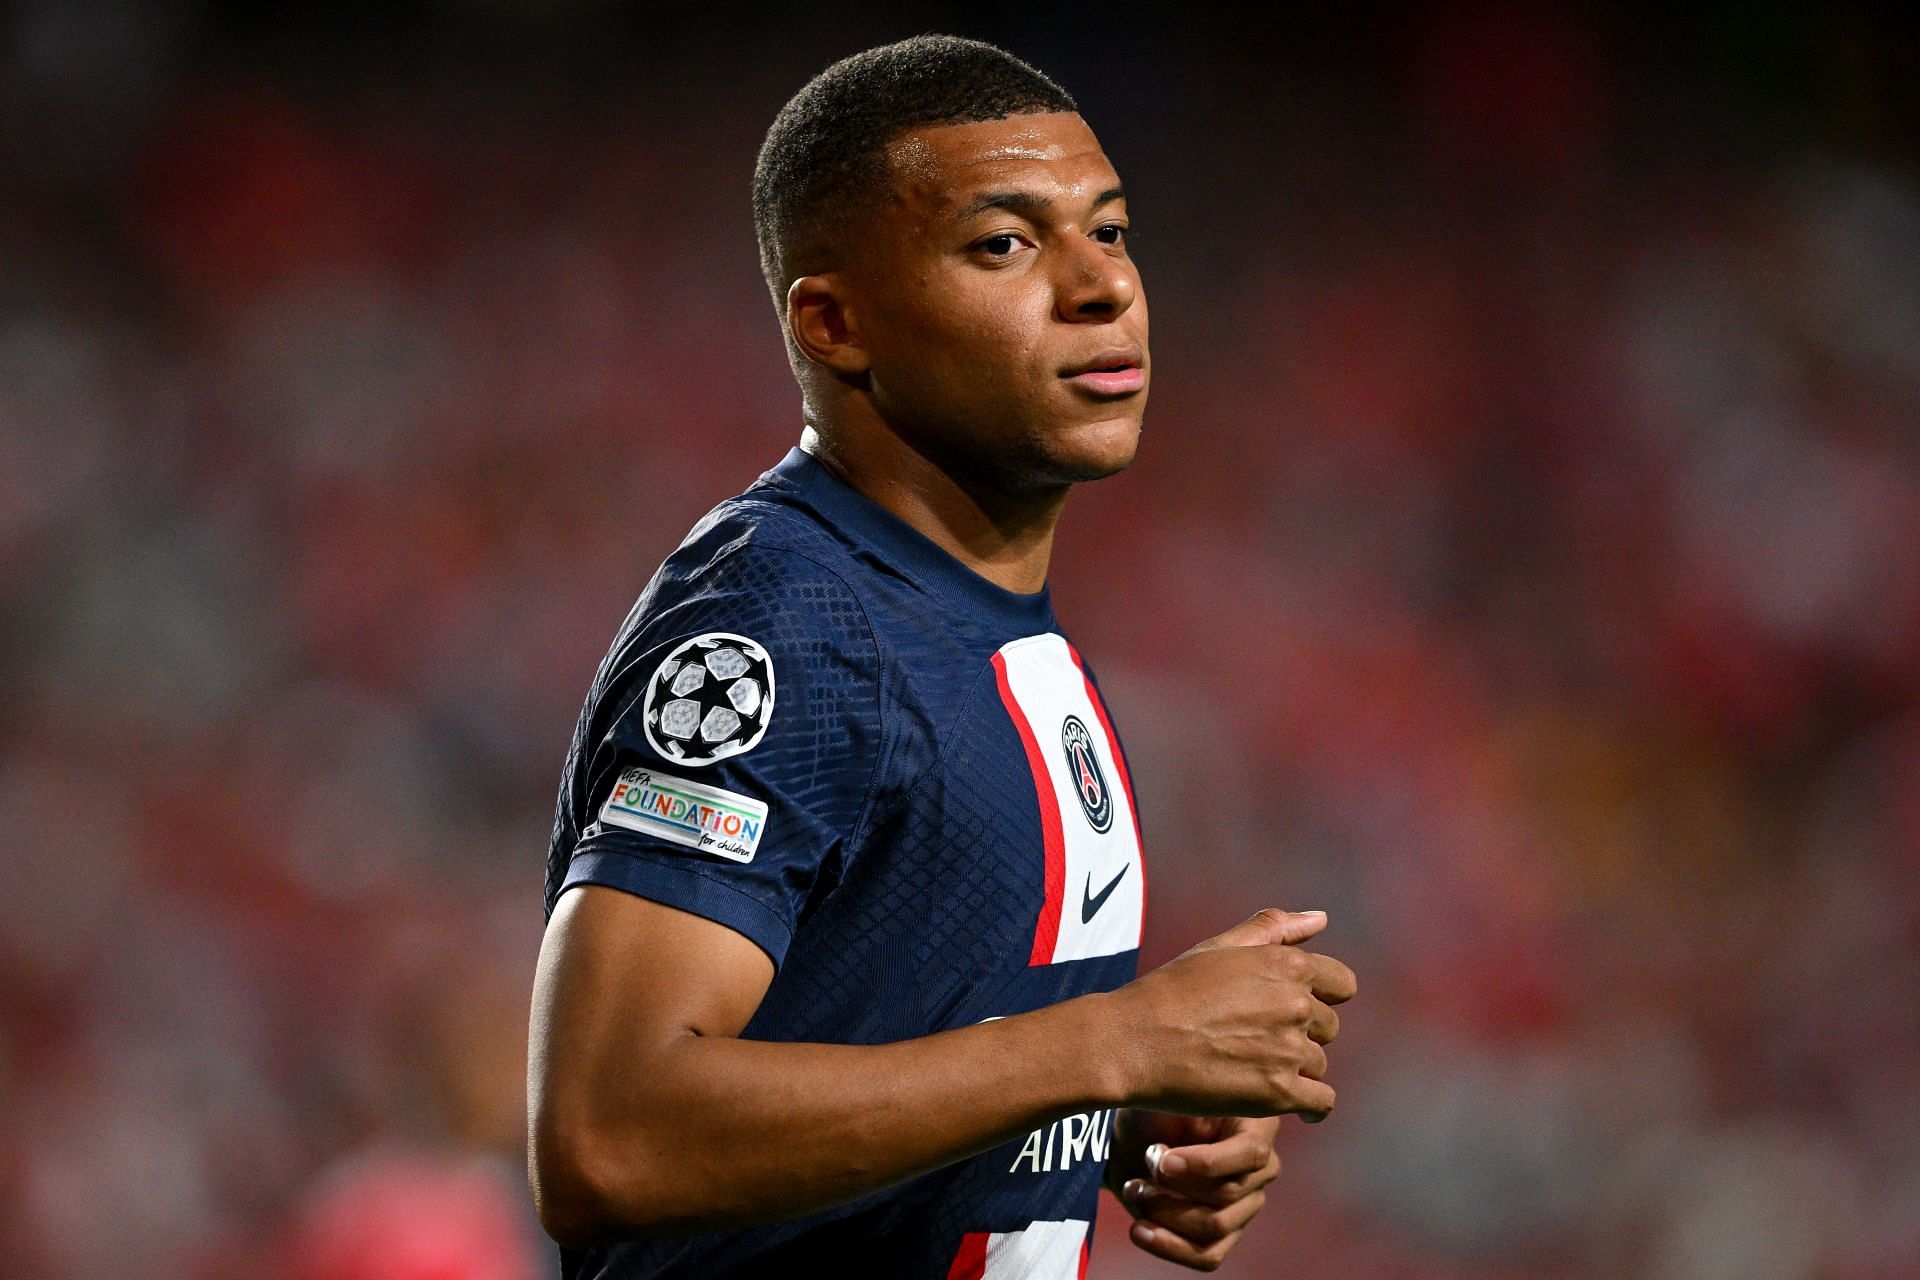 The timing of the Mbappe reports is problematic